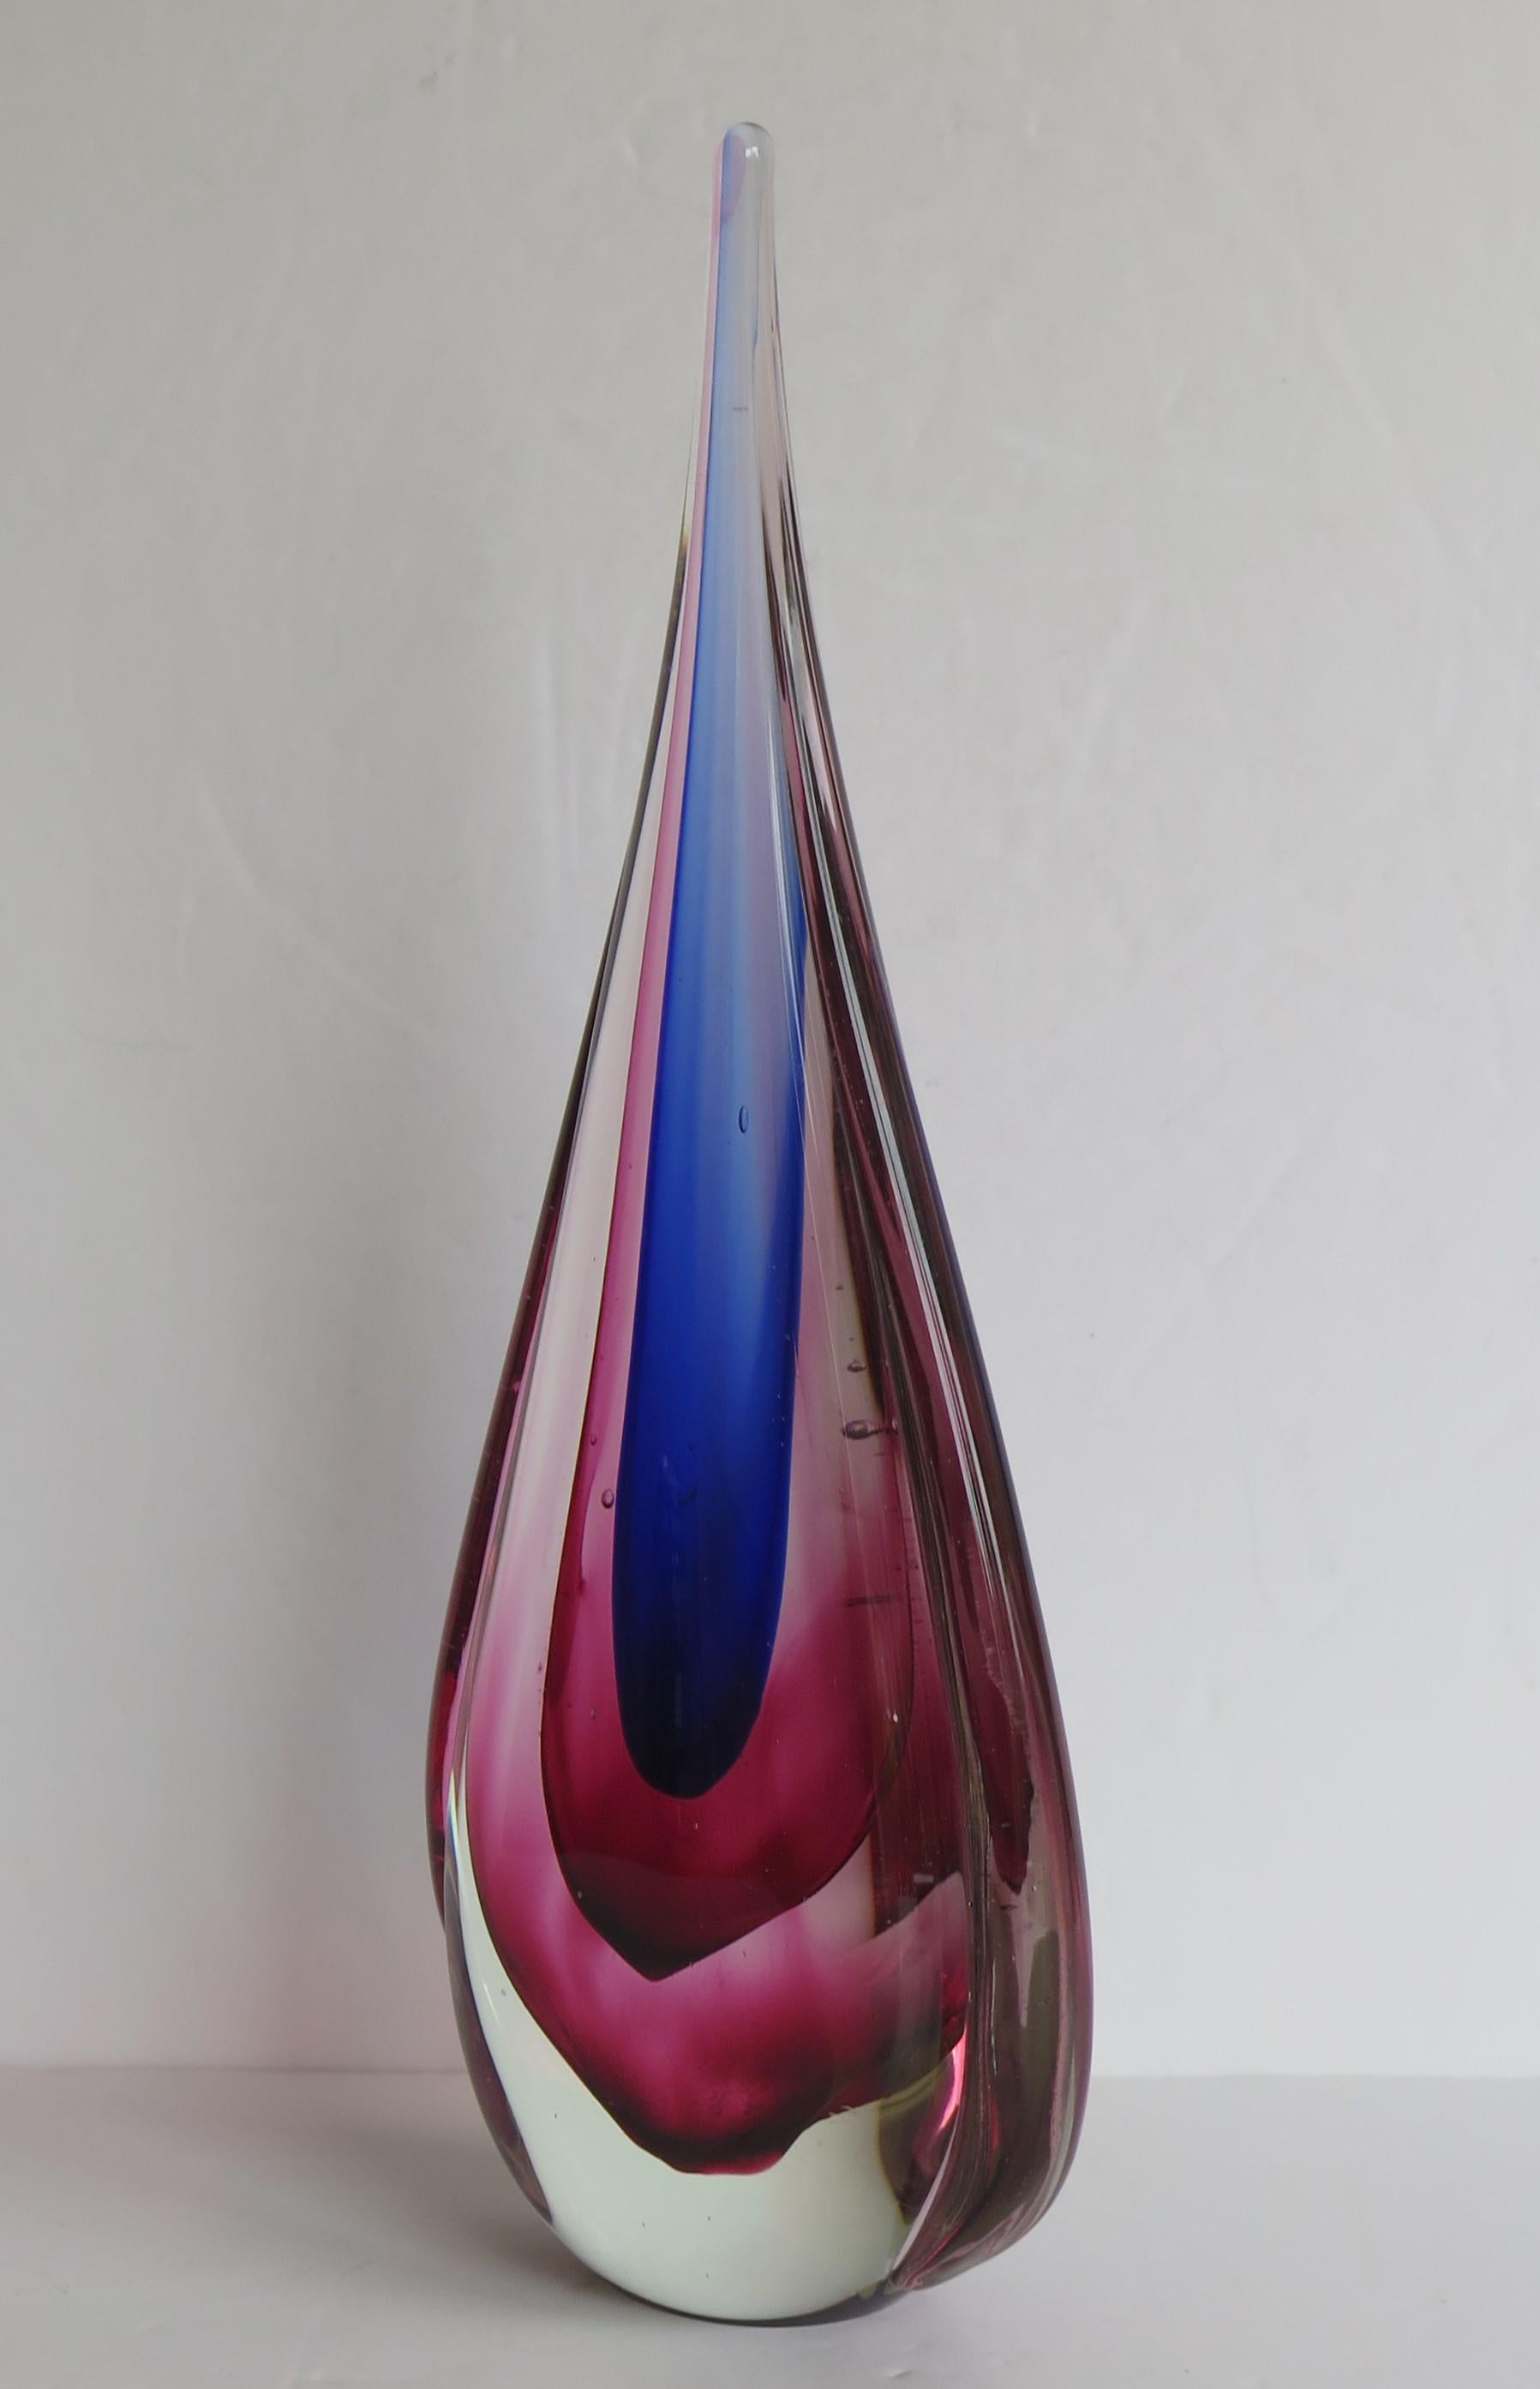 20th Century Tall Murano Glass Sommerso Teardrop Sculpture by Flavio Poli, Italy, circa 1950s For Sale